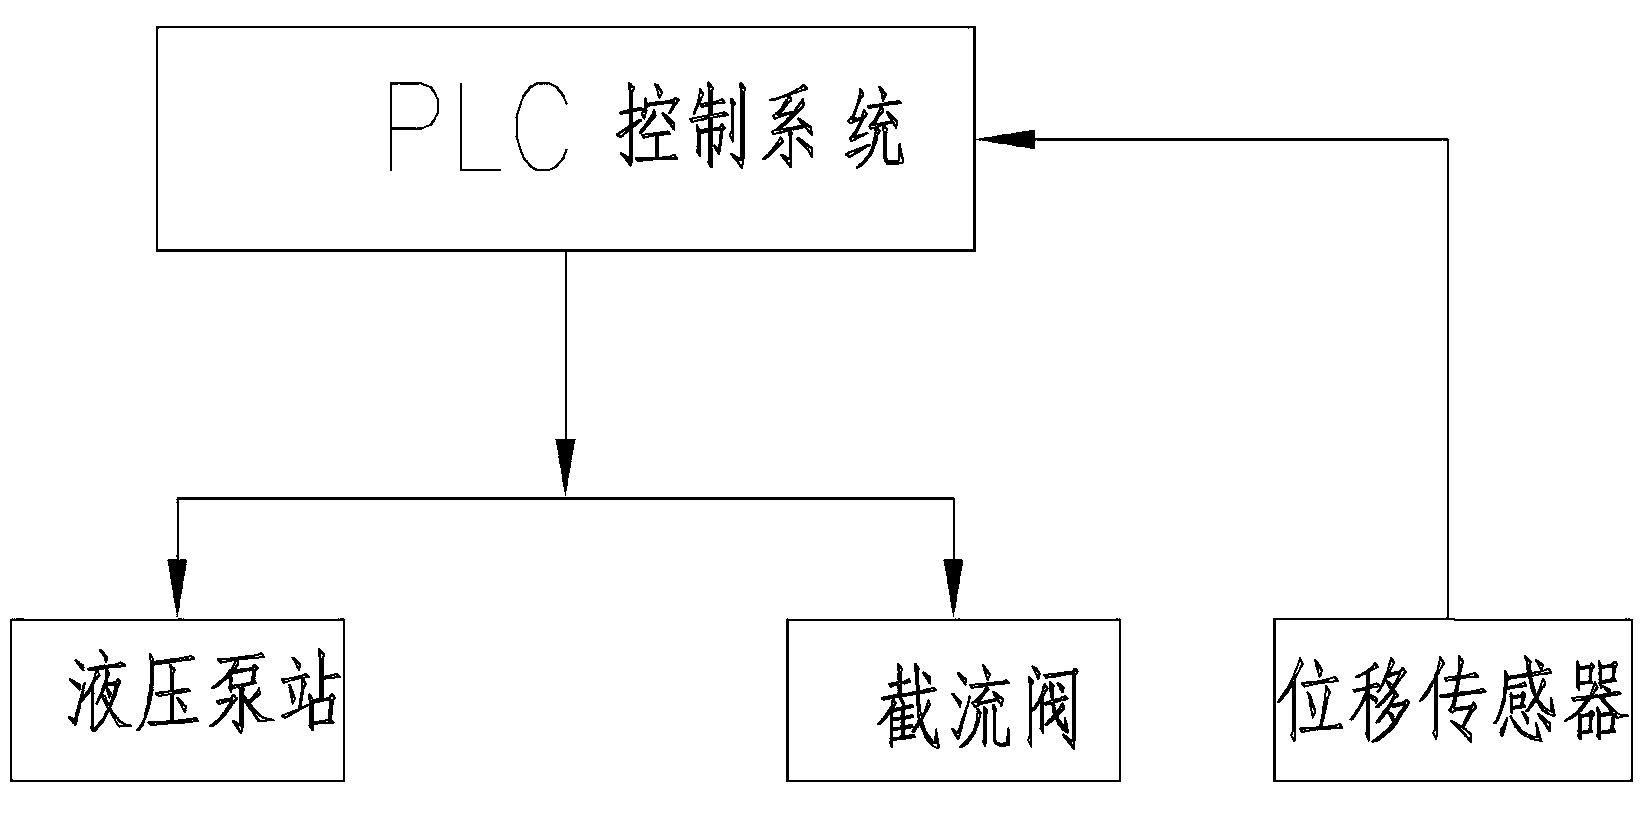 Control method for emptying air in underground filling riser by using cut-off valve